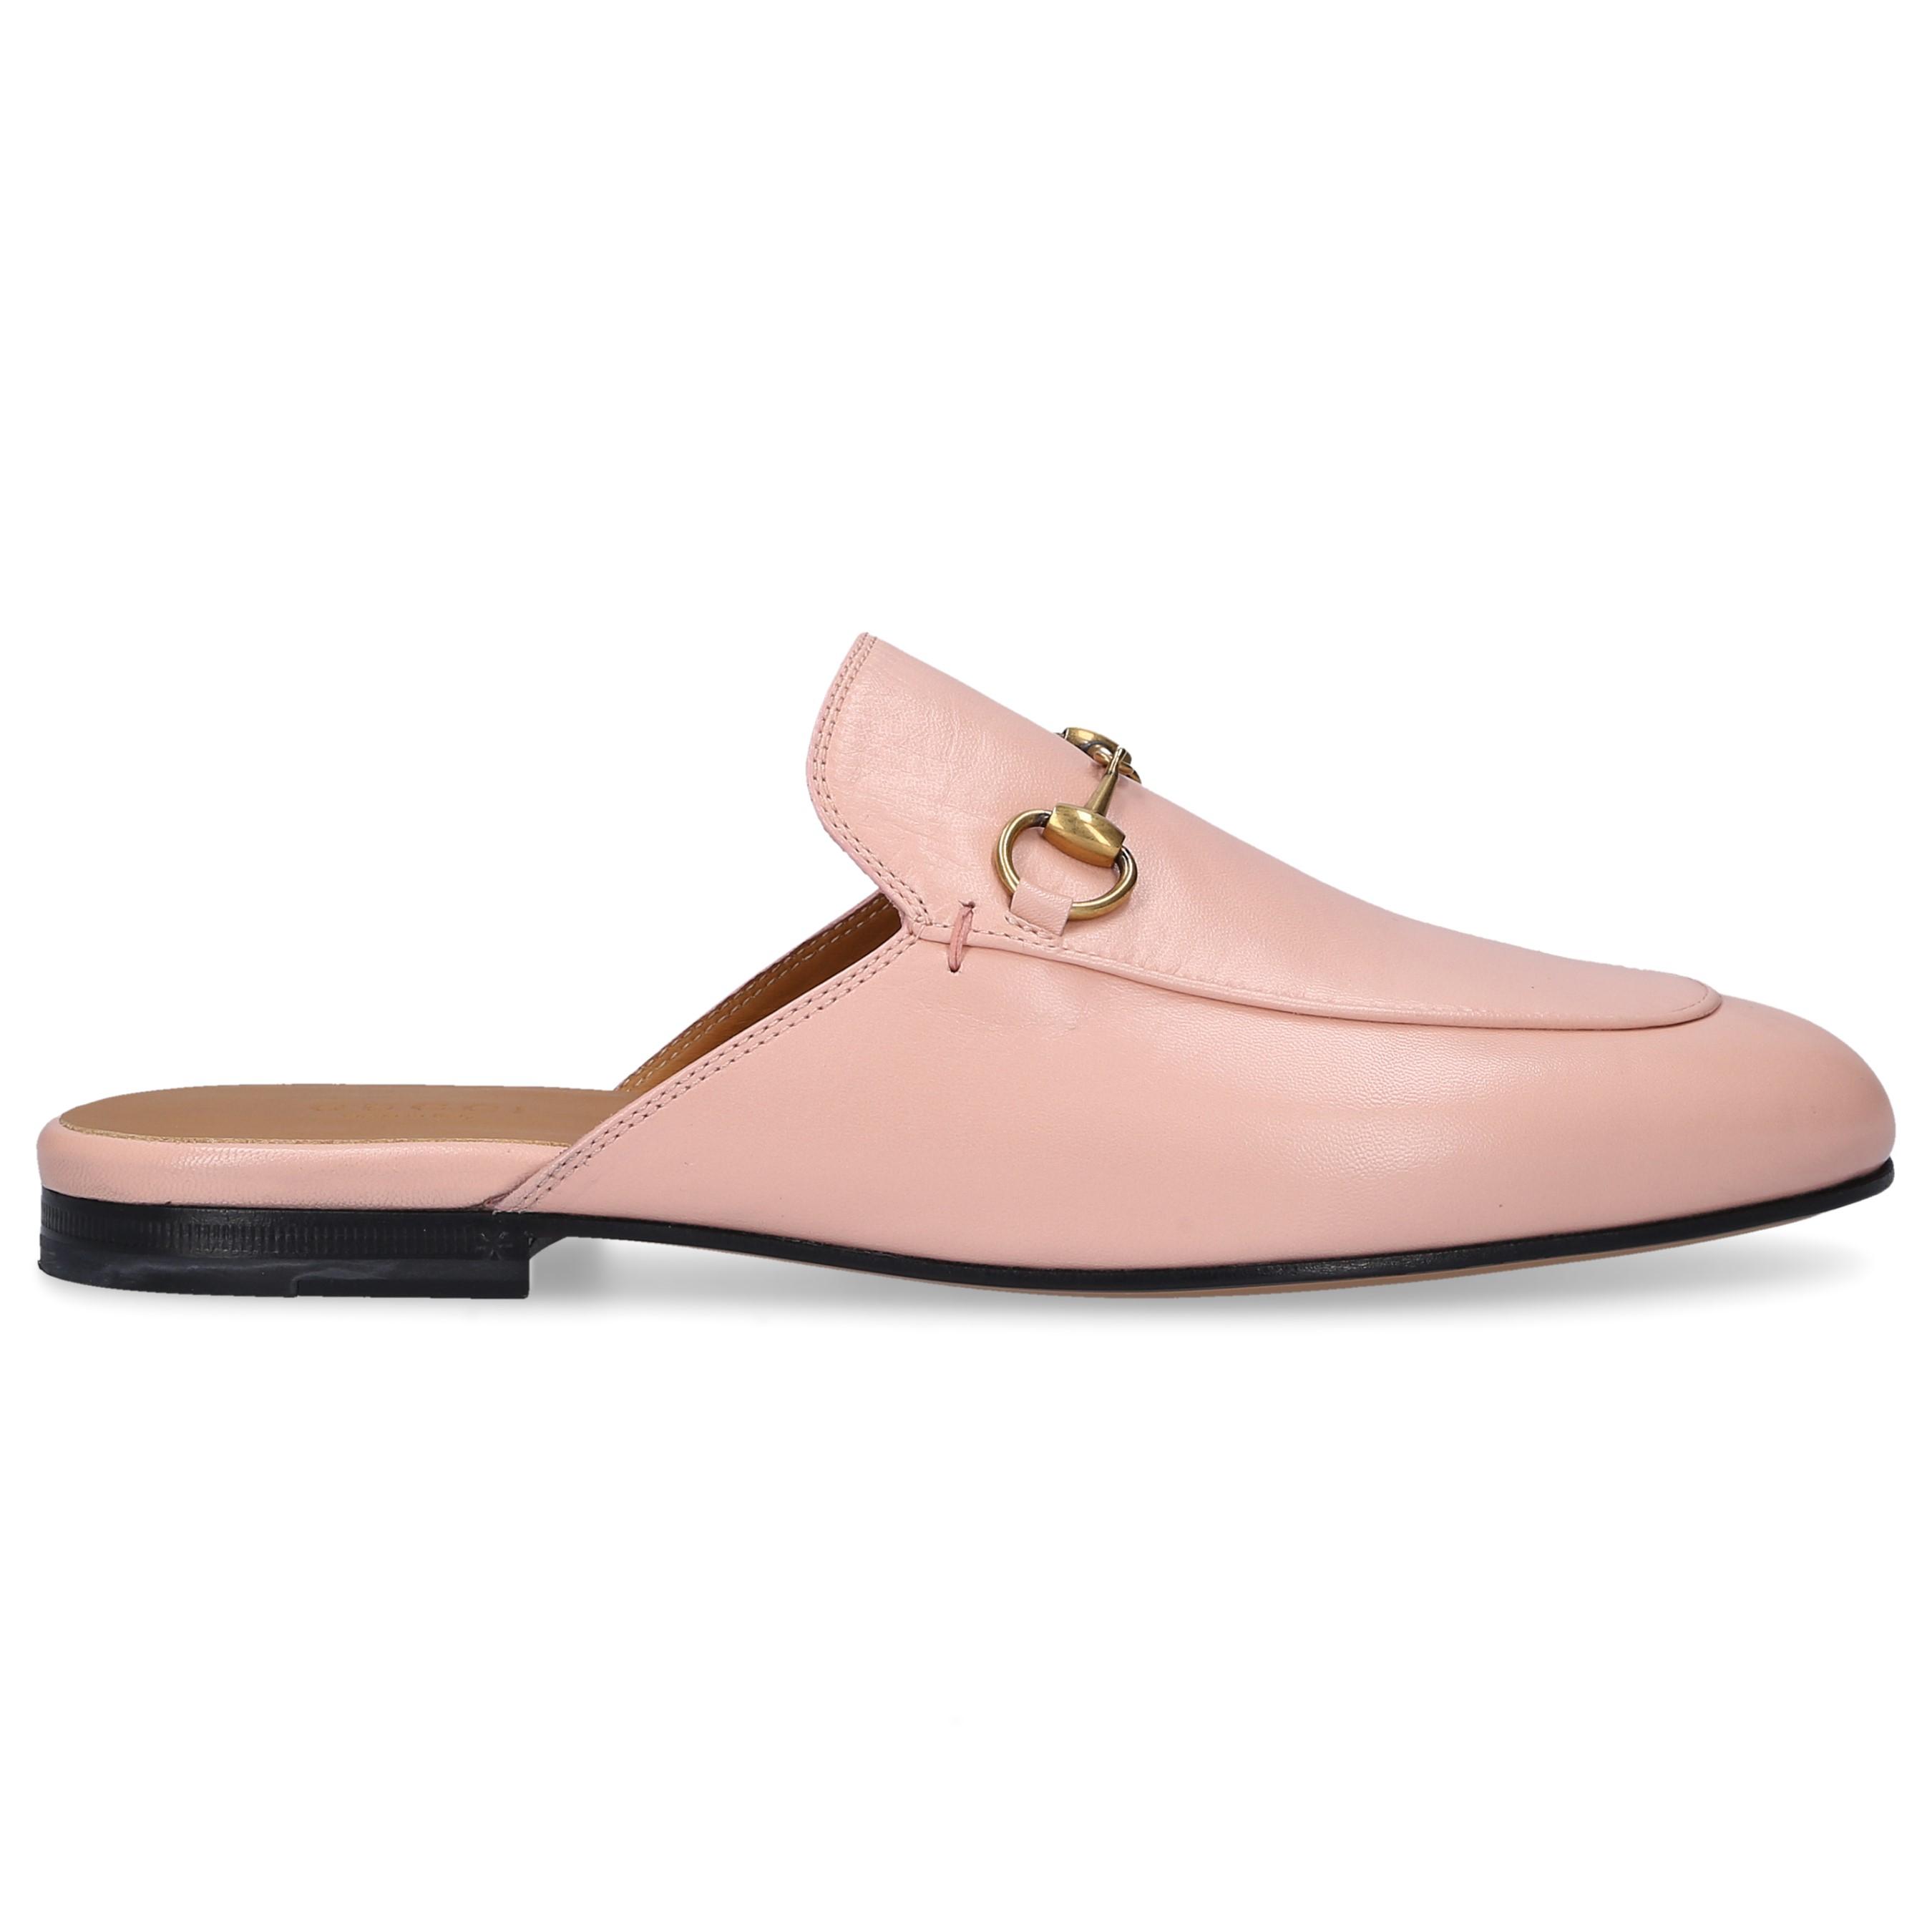 Gucci Leather Slip On Shoes Cd900 in Pink - Lyst